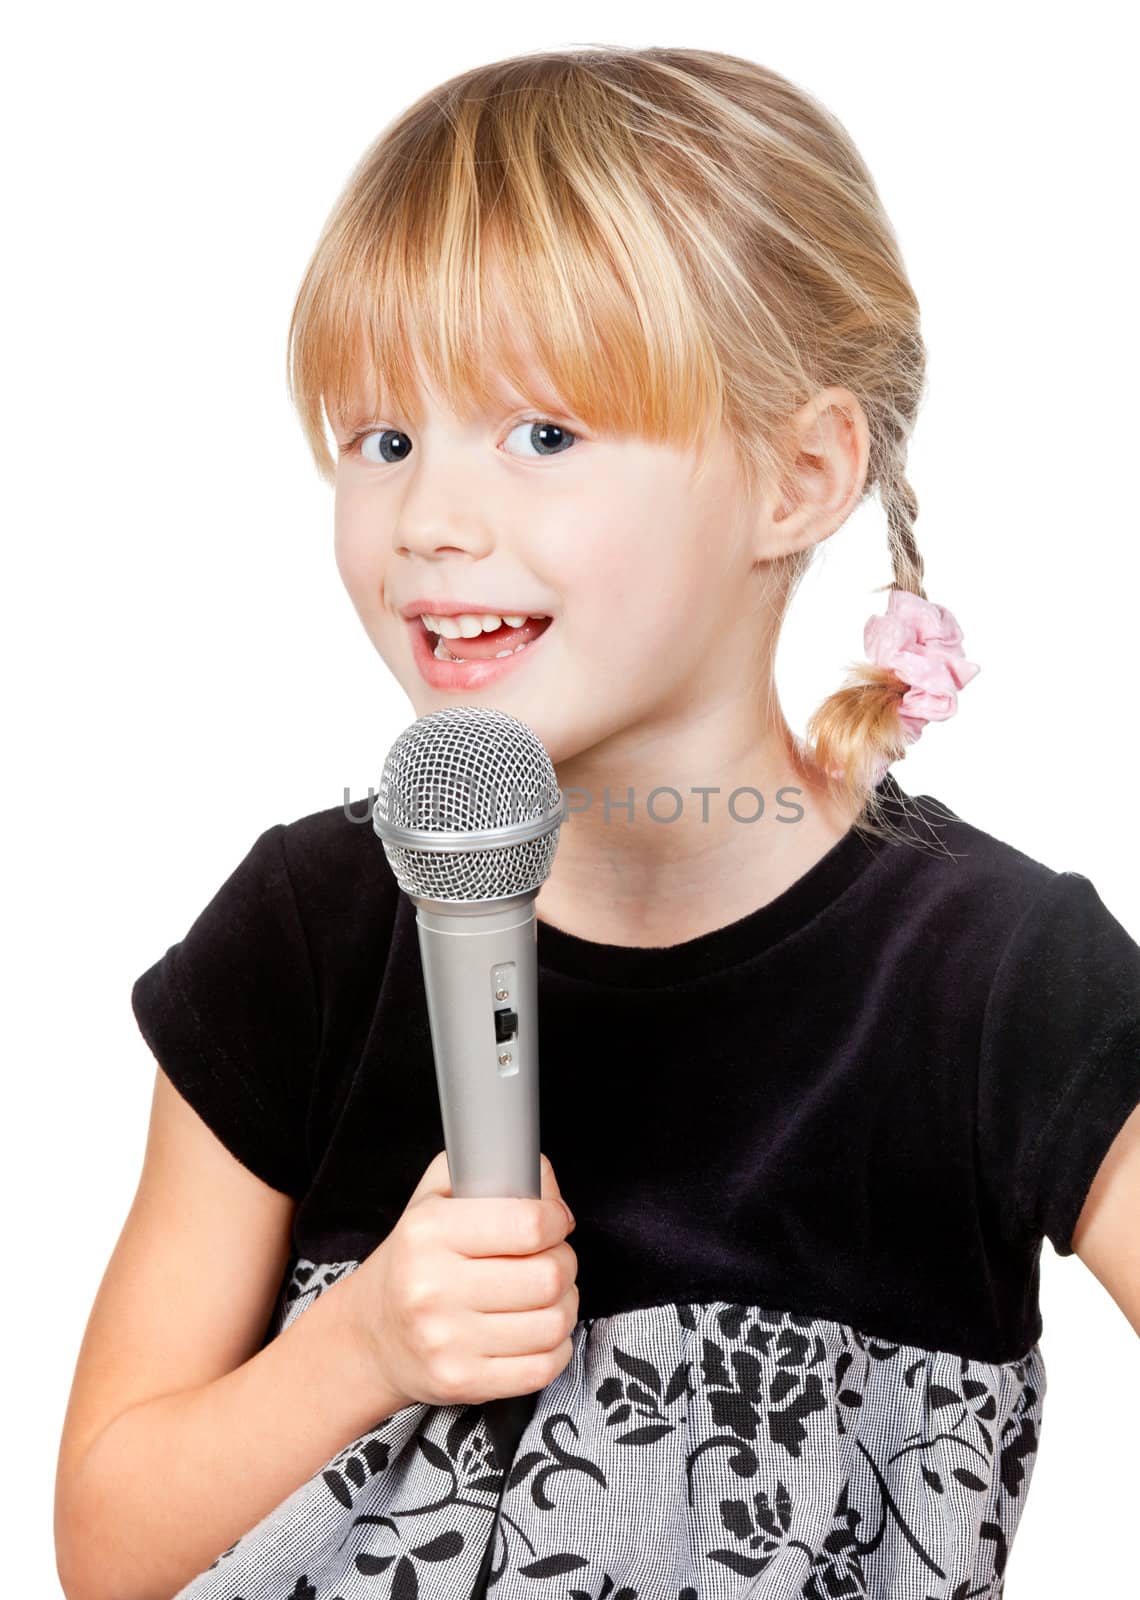 Child with microphone singing by naumoid